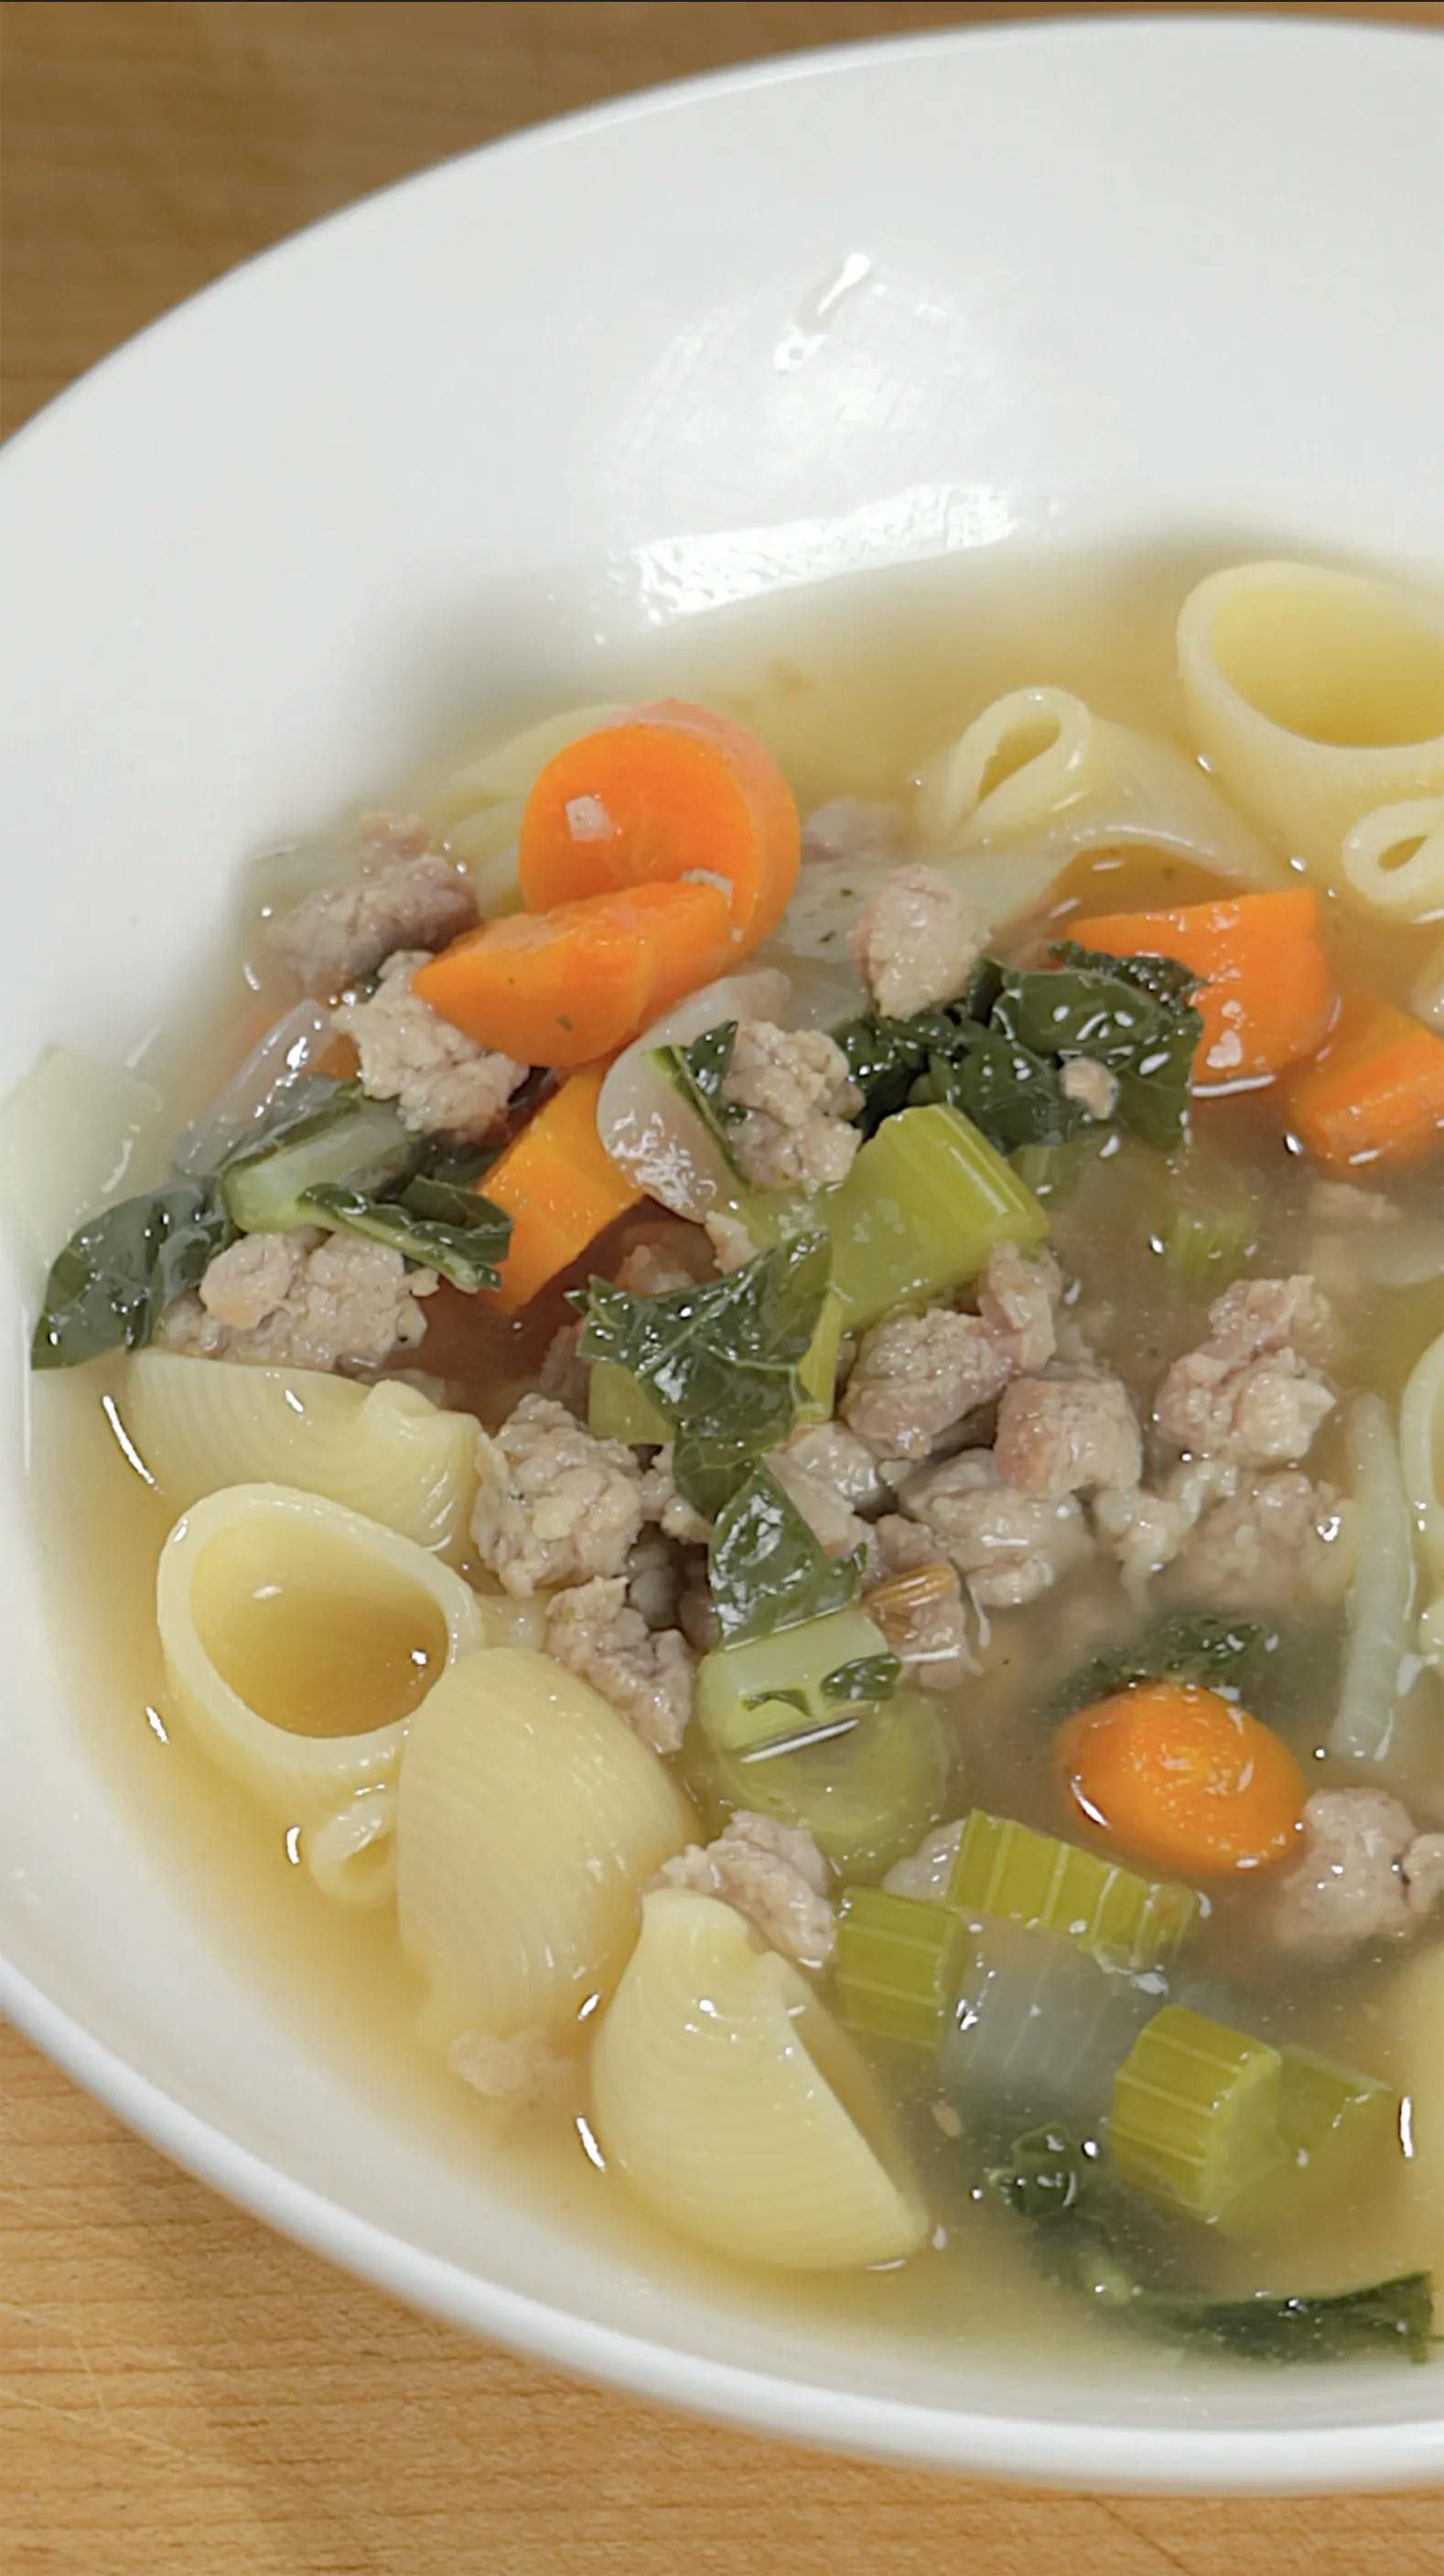 Picture for Sopa Toscana [Tuscan Soup]